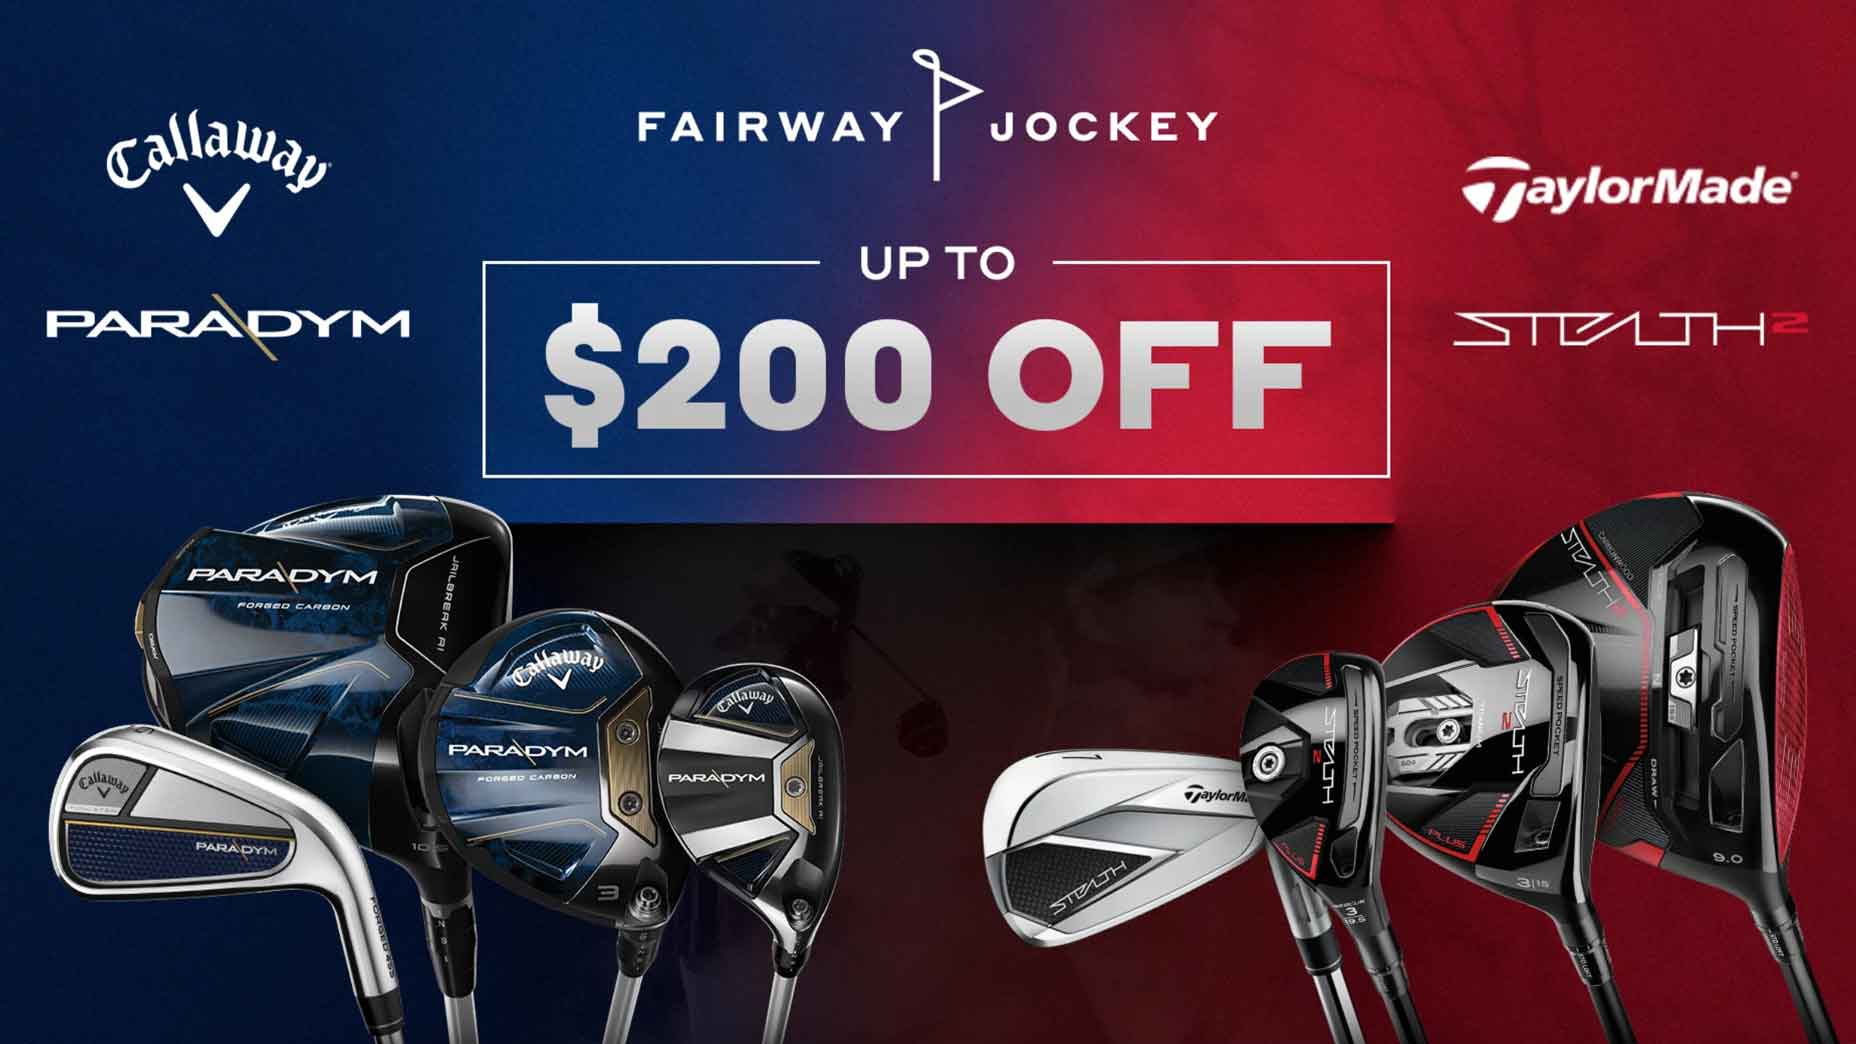 Save now: These TaylorMade and Callaway golf clubs are on sale